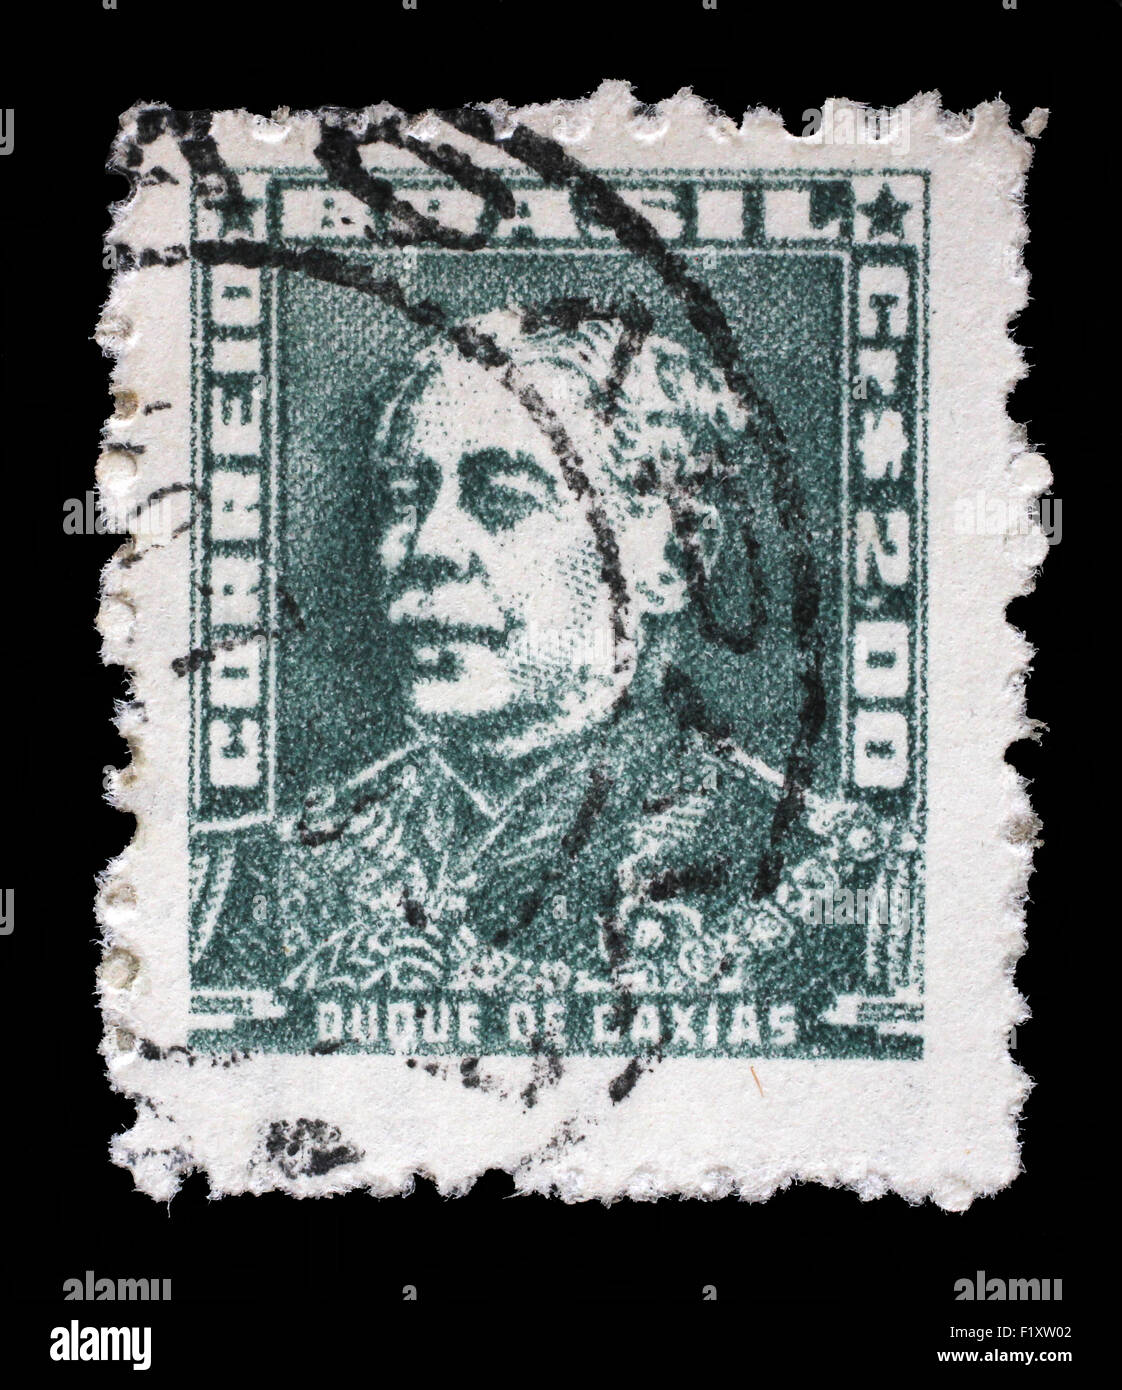 Stamp printed in Brazil from the Portraits issue shows Duke of Caxias, circa 1954. Stock Photo